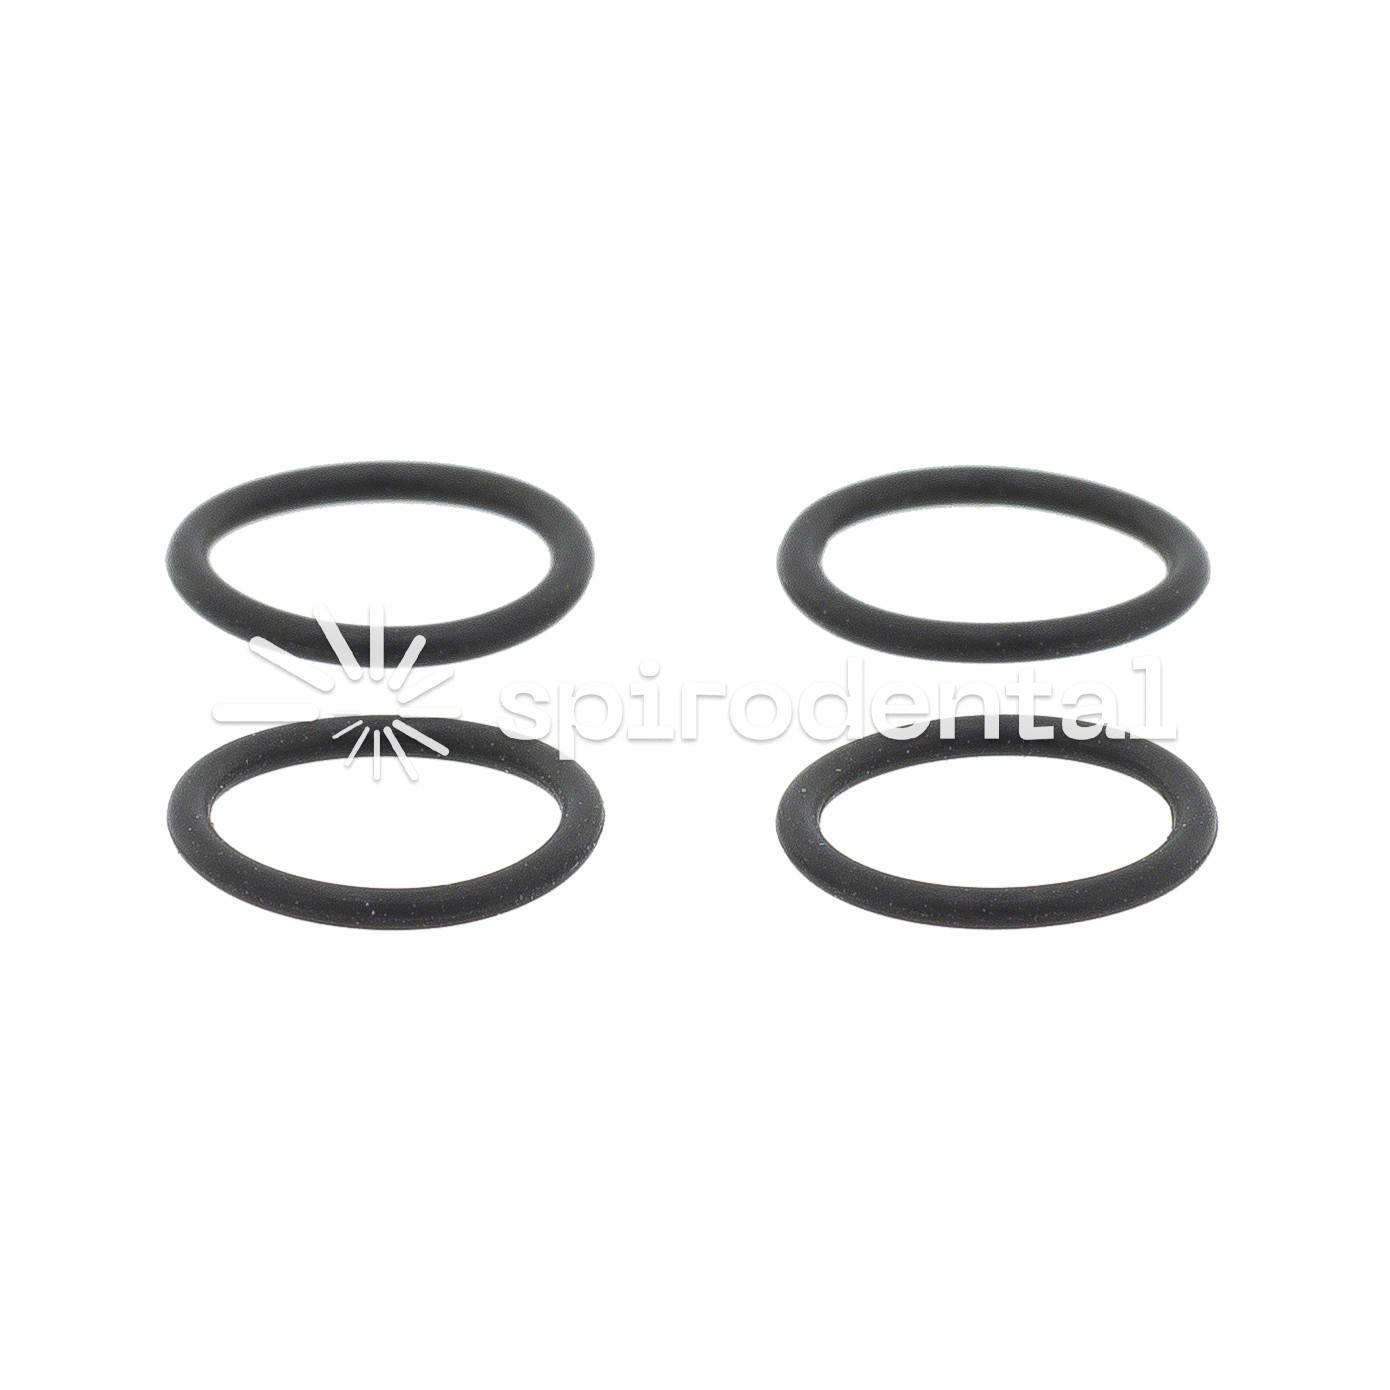 O-ring set for W&H – substitute W&H 02060100